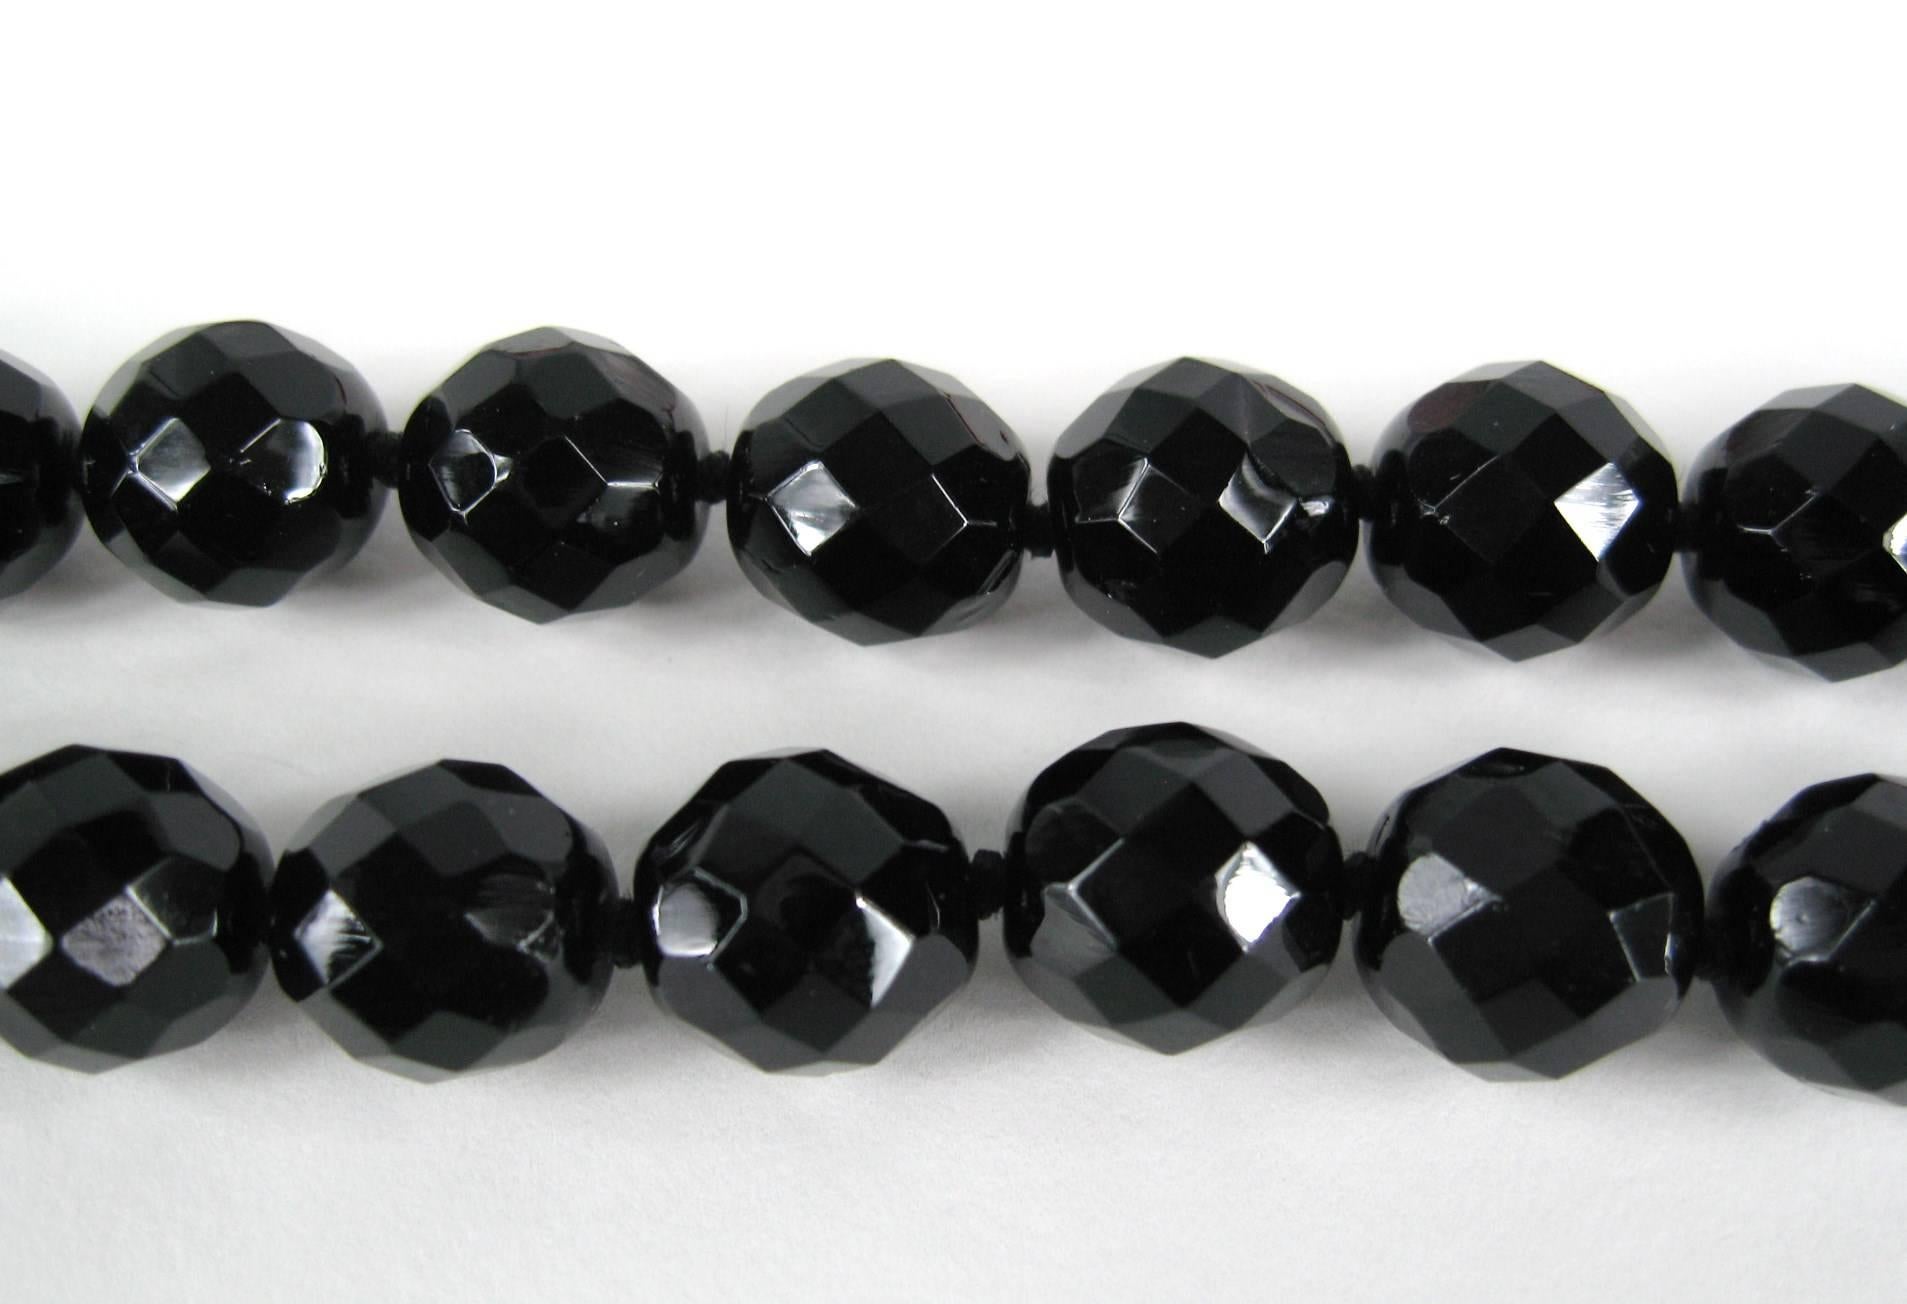 black faceted bead necklace